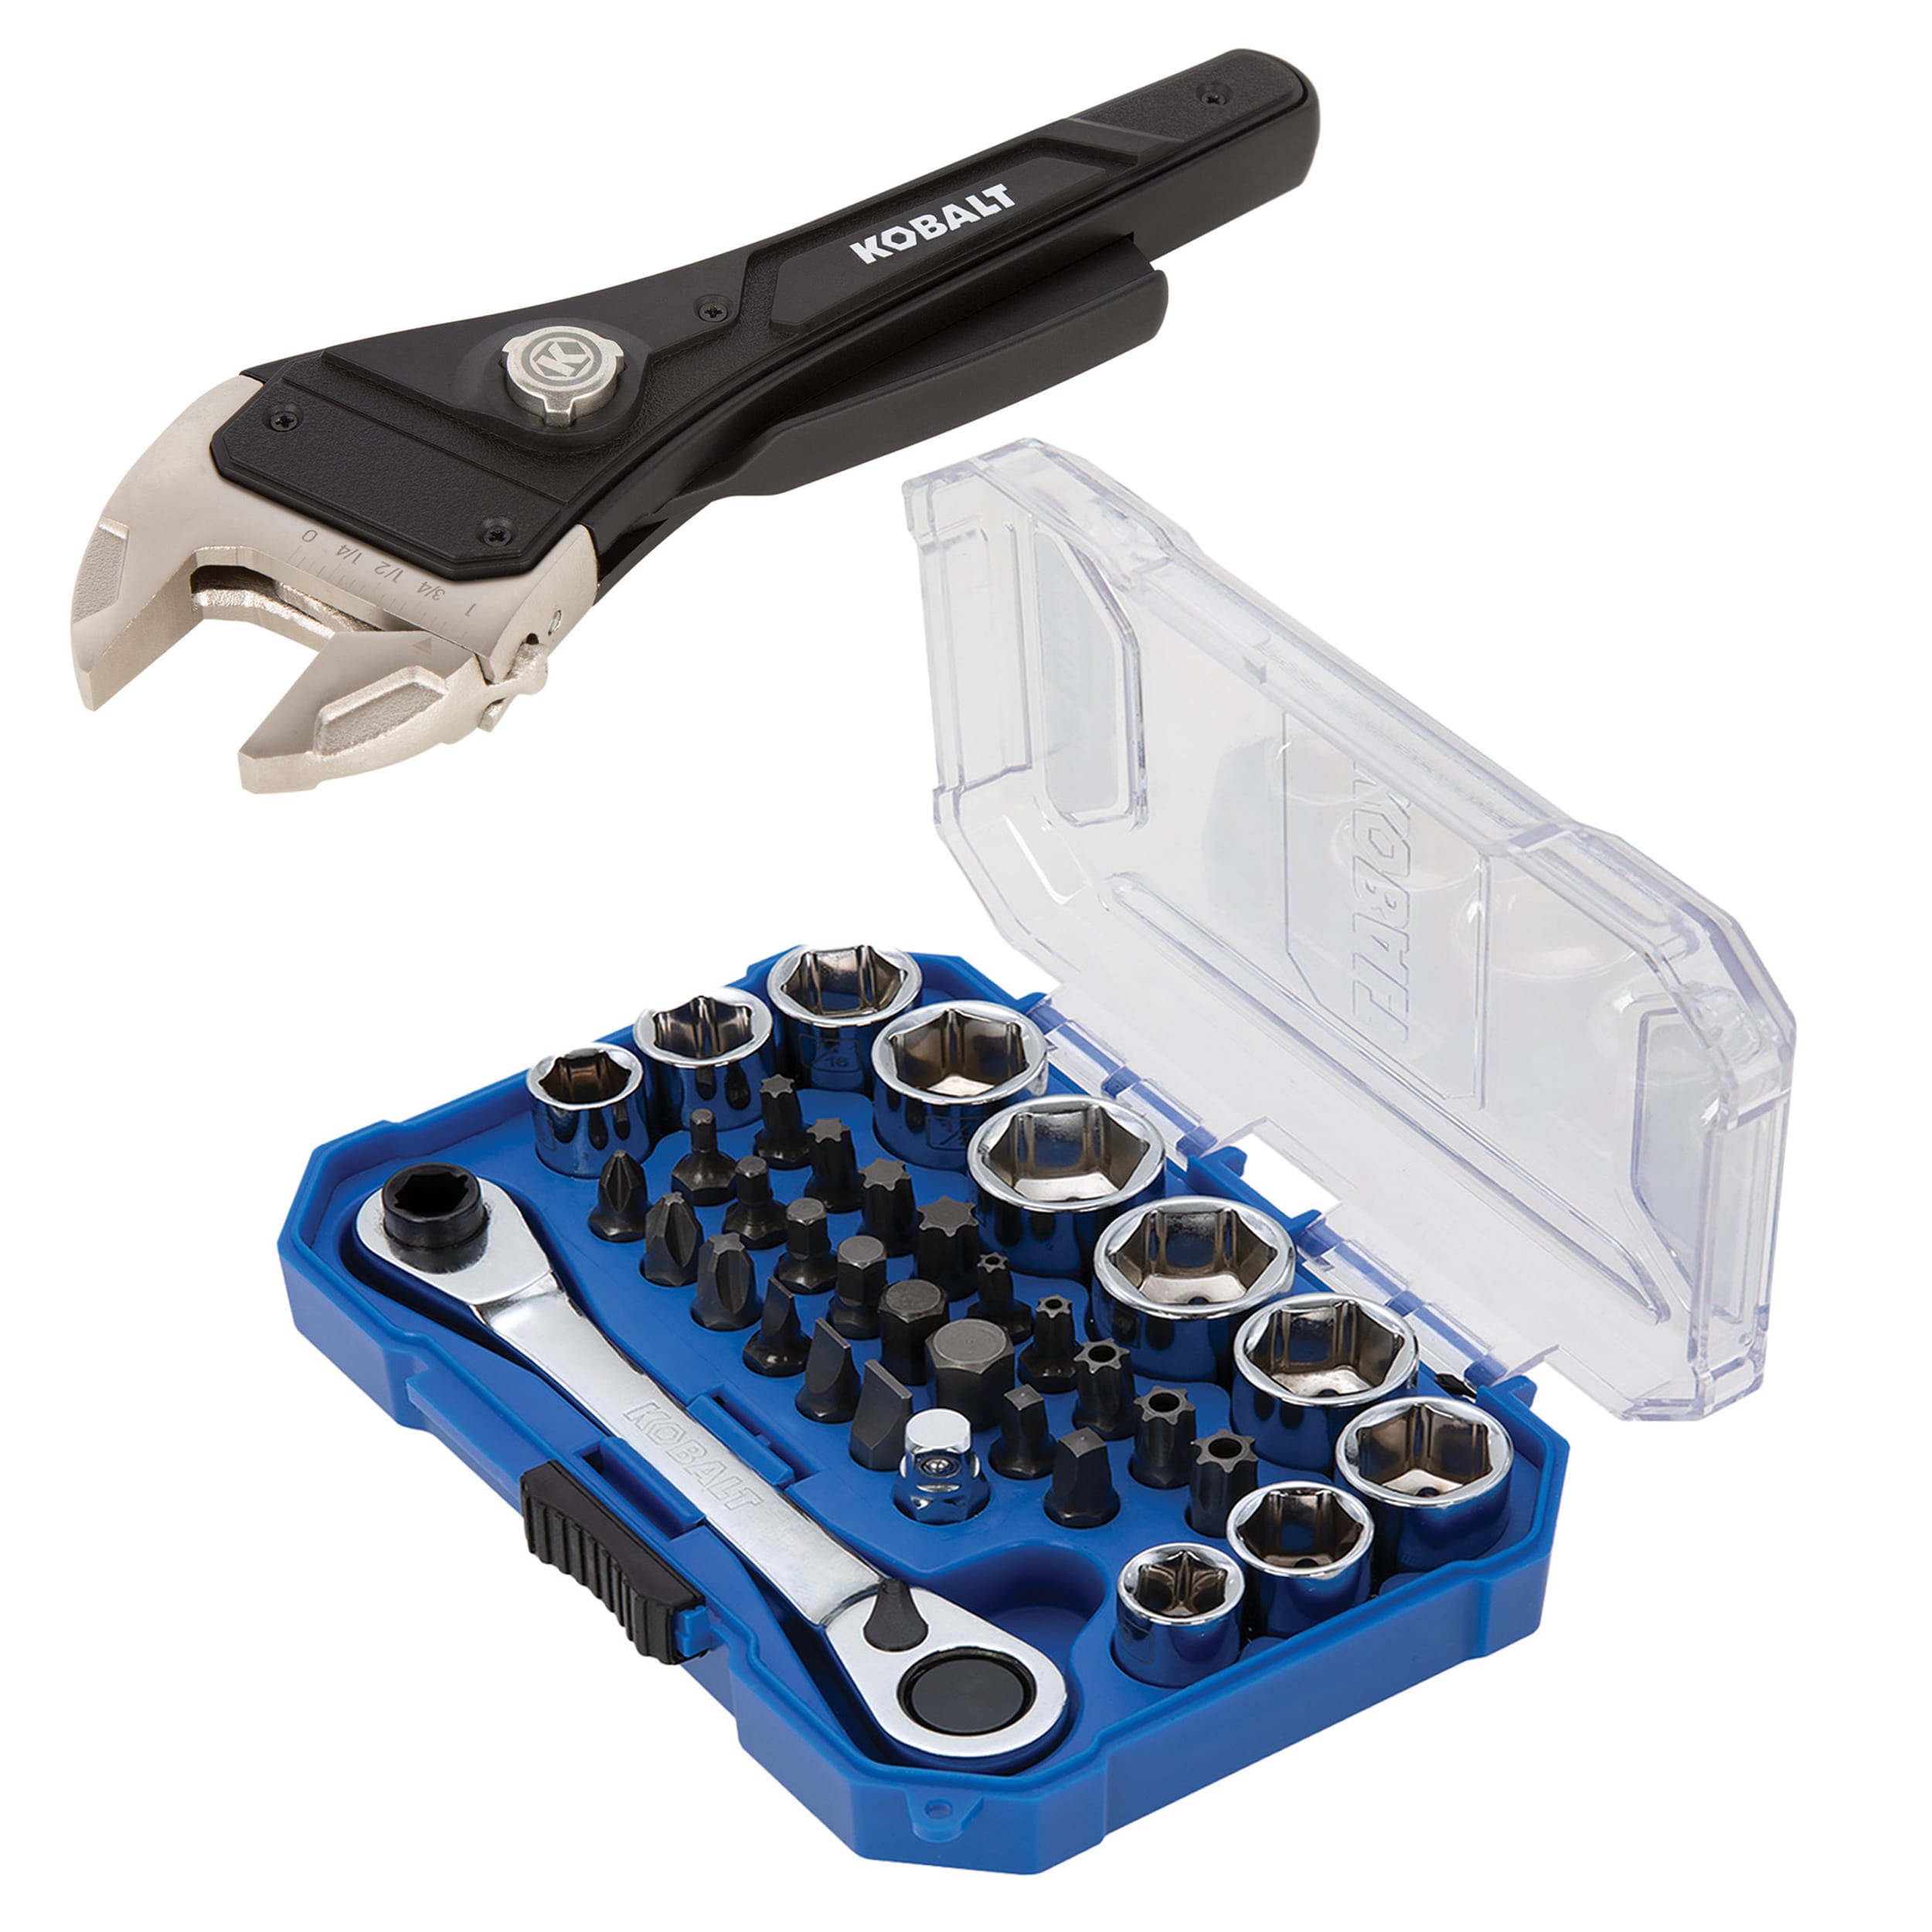 Tool Mechanics 35-Piece with Metric Standard department Chrome (SAE) in Polished Mechanics Kobalt and at Sets Tool Hard Set Combination the Case